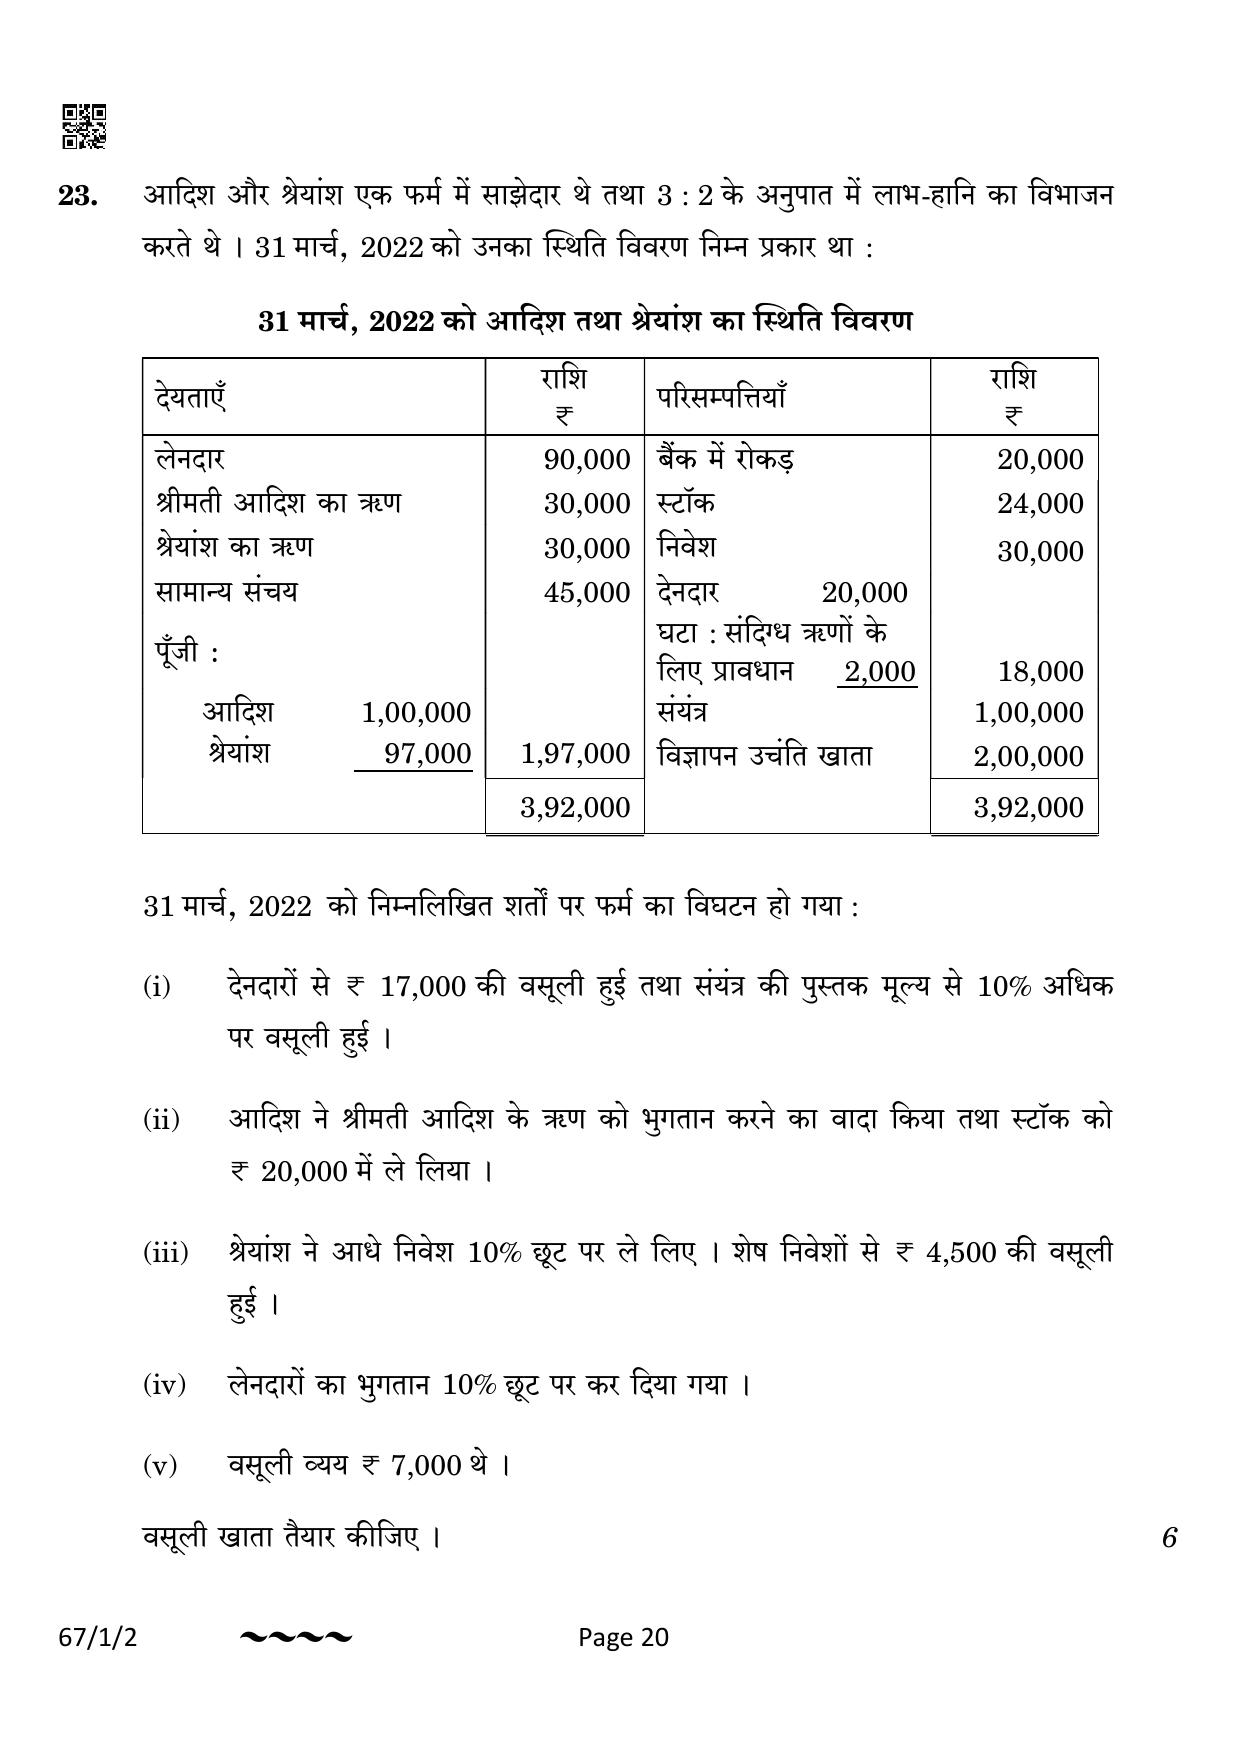 CBSE Class 12 67-1-2 Accountancy 2023 Question Paper - Page 20